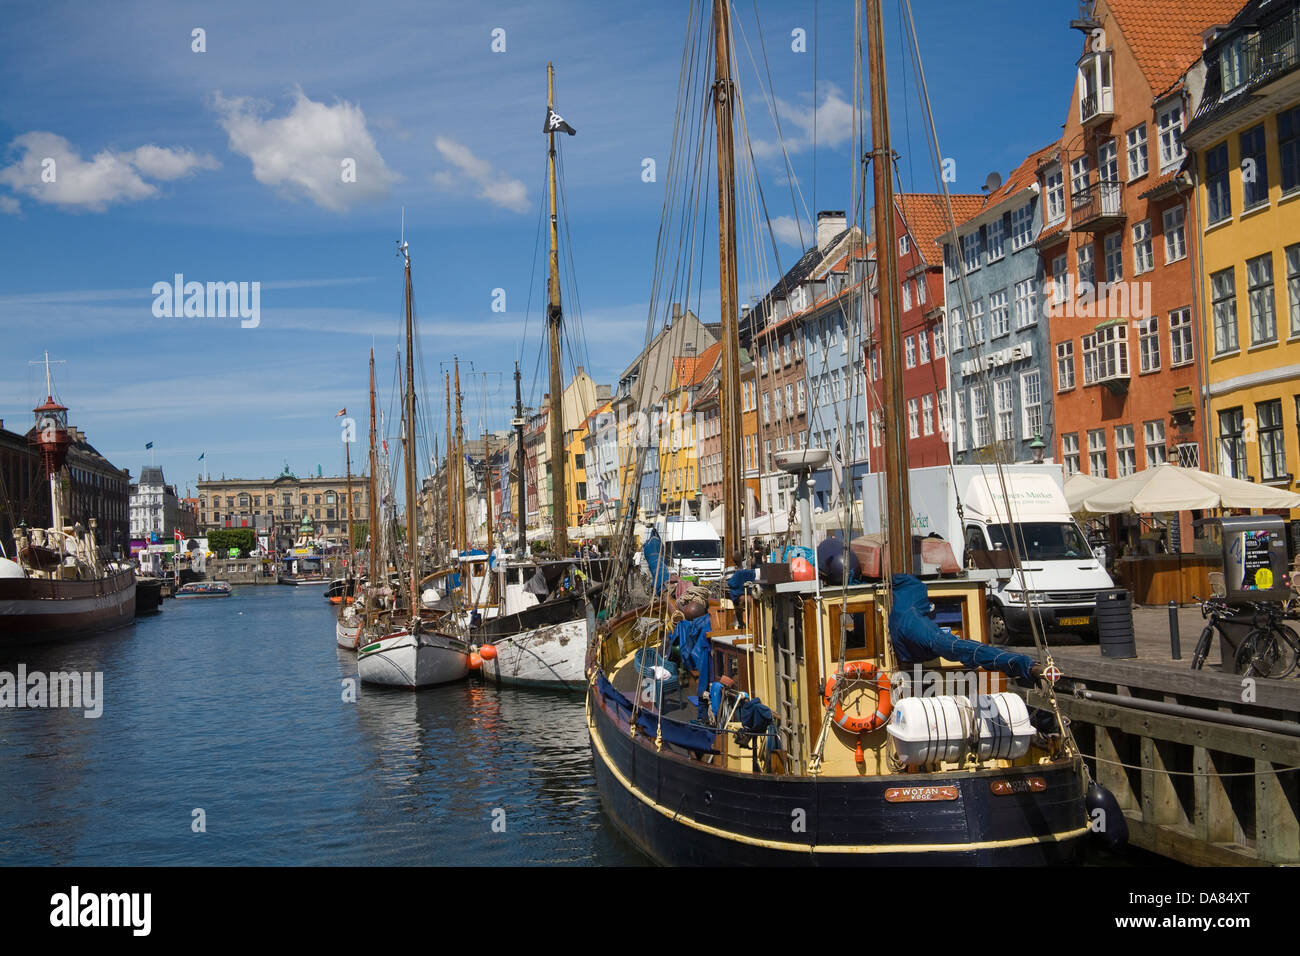 Copenhagen Denmark EU View along Nyhavn canal with moored sailing boats and colourful facades of 17thc buildings Stock Photo